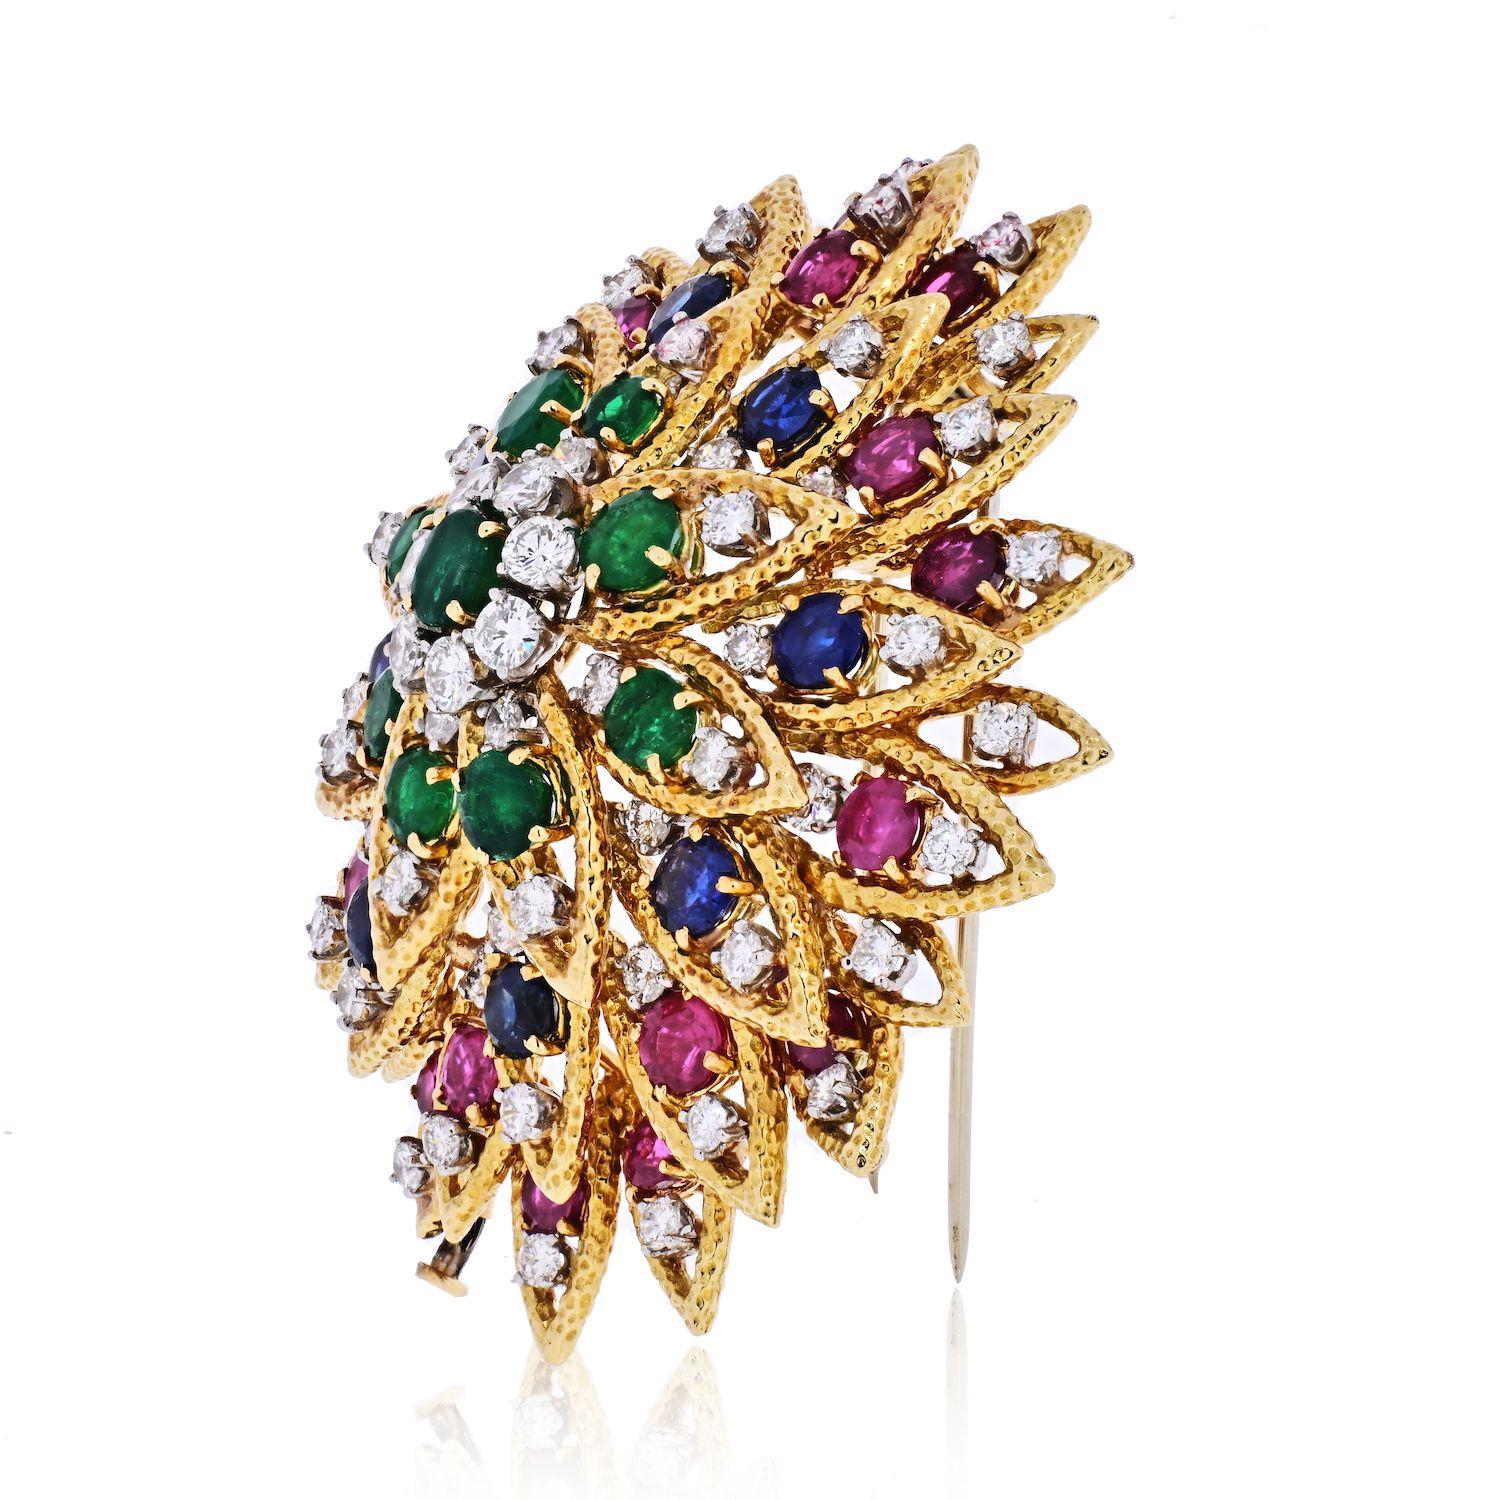 A spectacular brooch crafted in 1970's by David Webb. This is a multicolor gemstone brooch set with diamonds, emeralds, rubies and sapphires.Set with 69 White Round Diamonds, 9 Green Emeralds, 8 Sapphires, and 16 Rubies this is an impressive